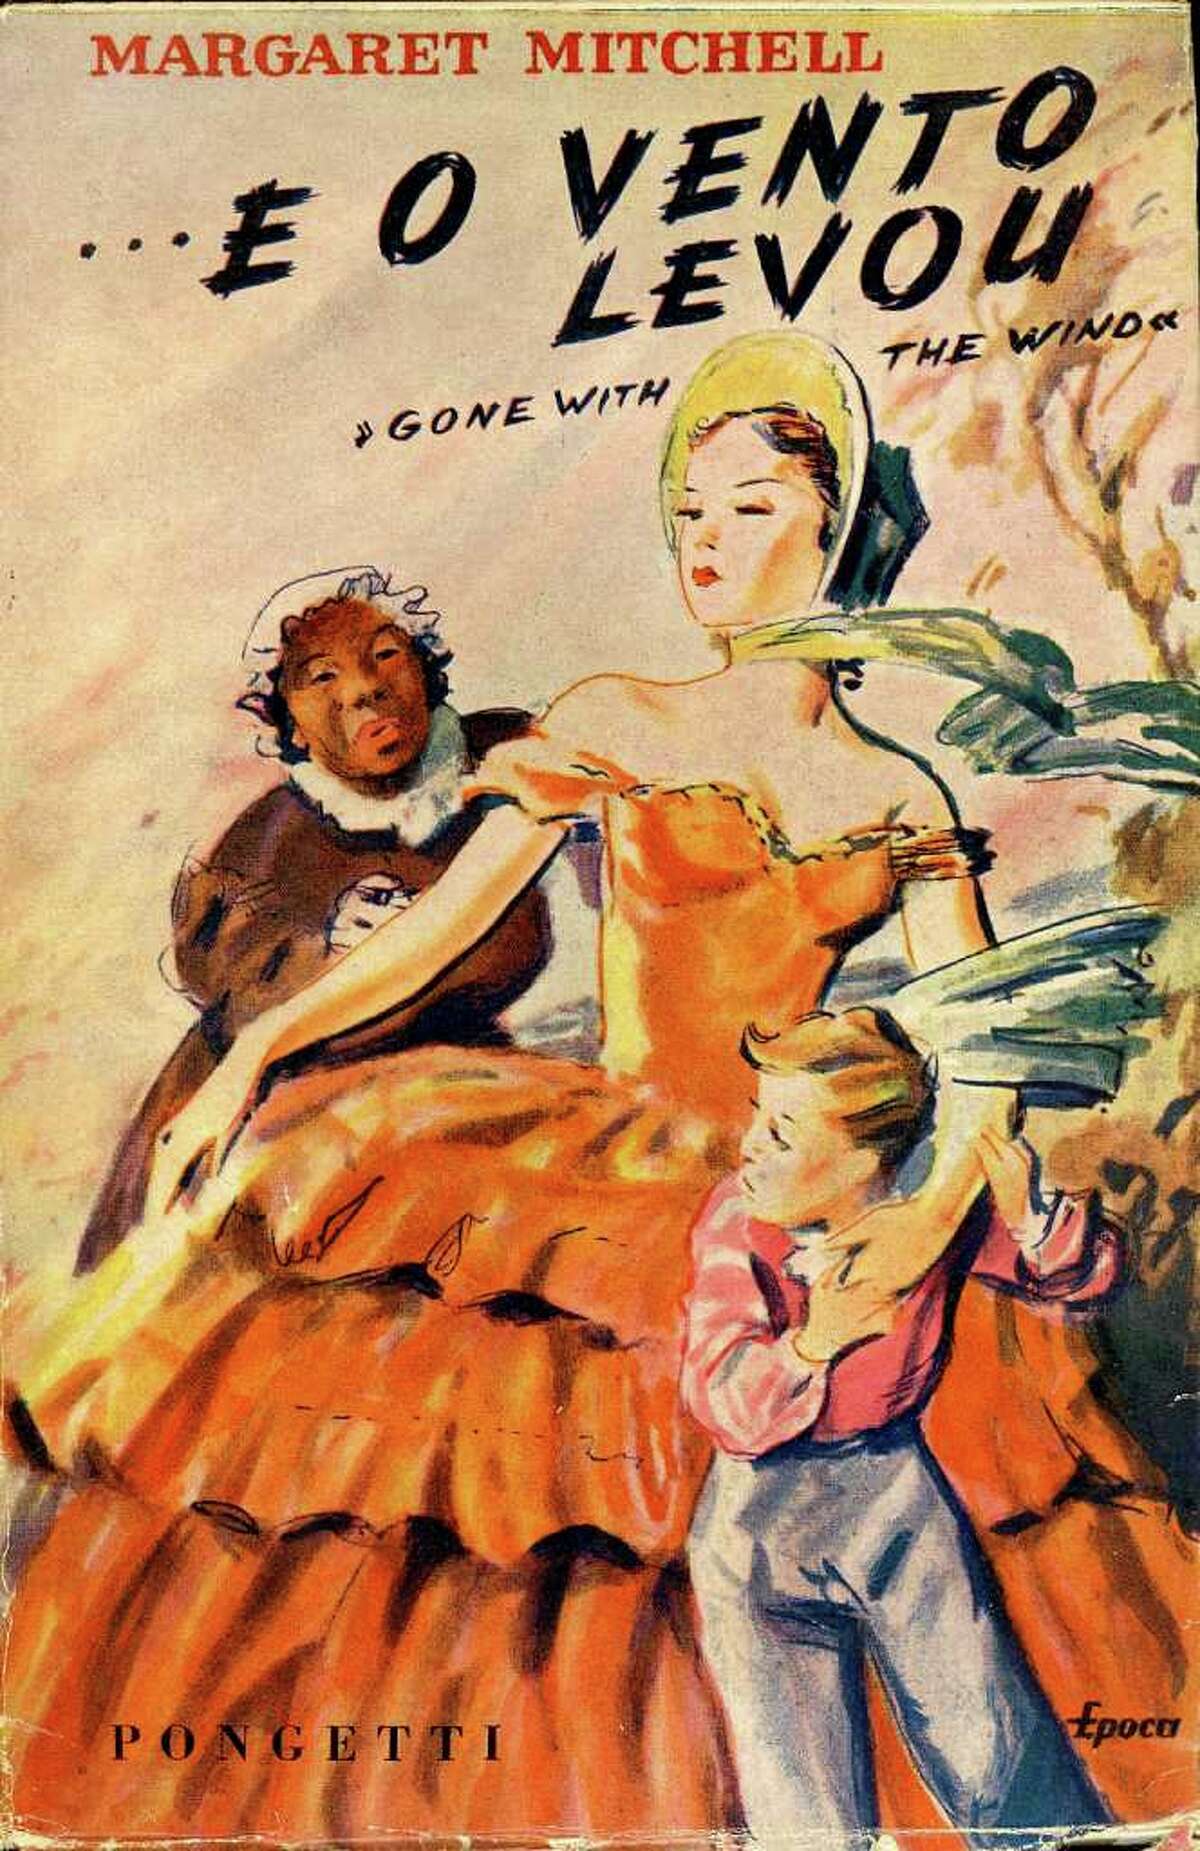 gone with the wind book